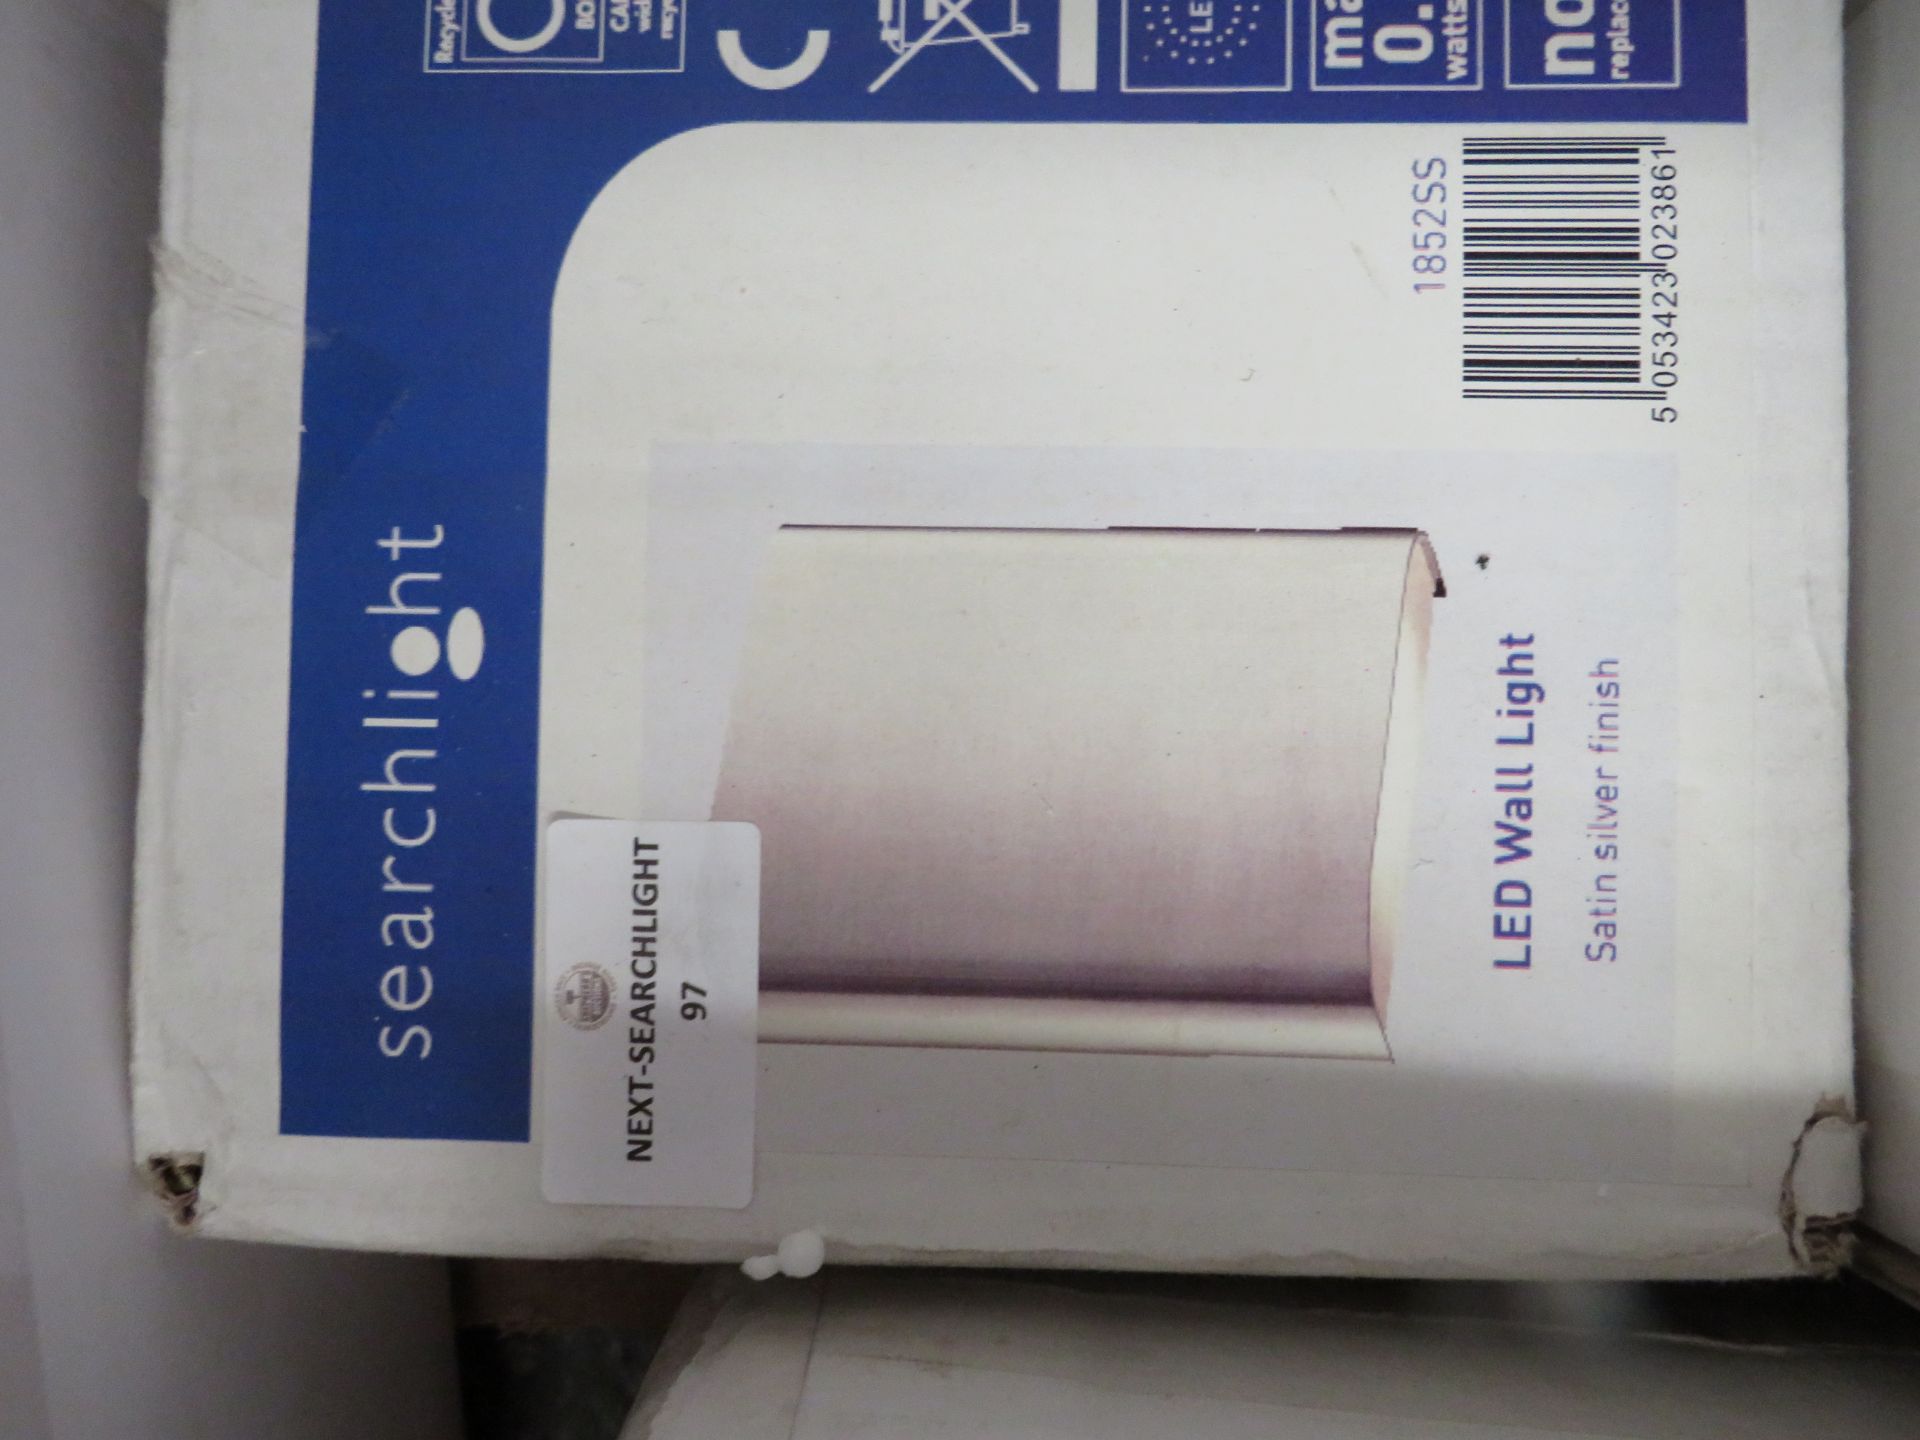 Searchlight 1852SS LED Satin Silver Wall Light RRP “?58.00 (PLT 3plt) - This lot contains unsorted